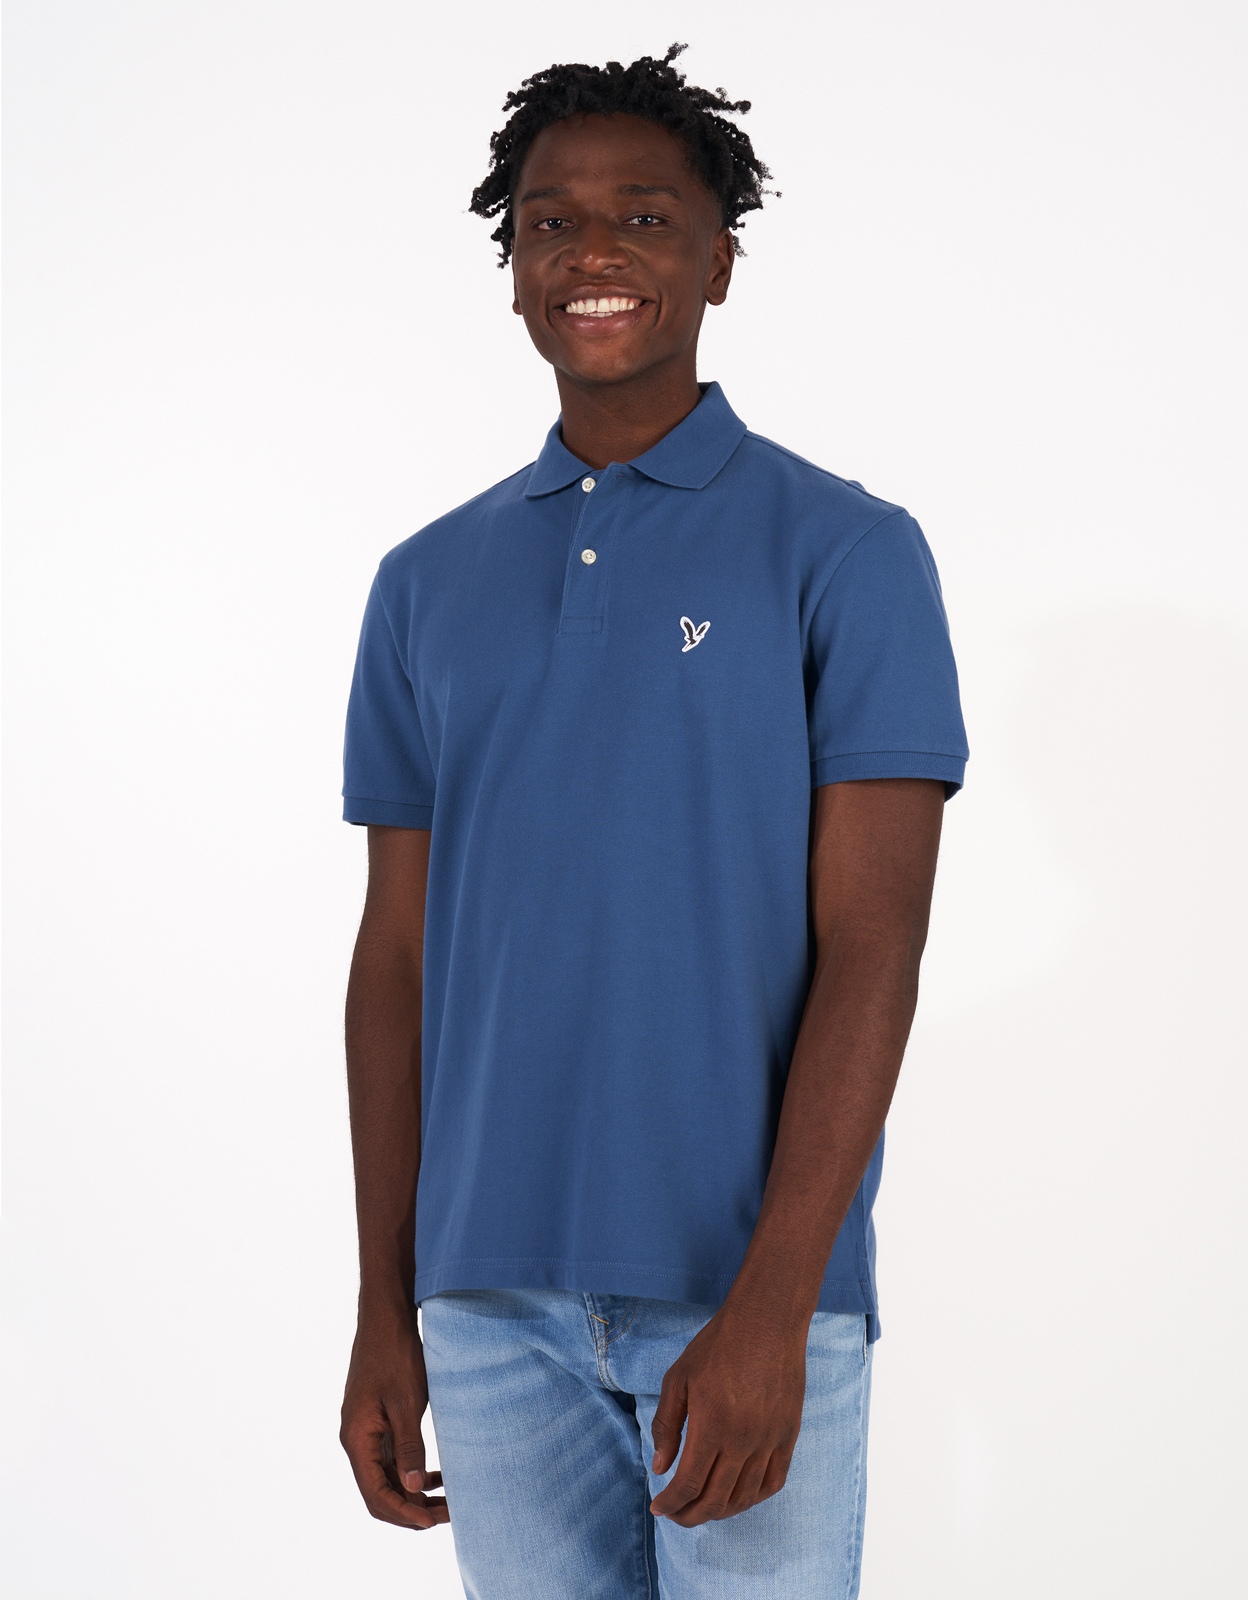 Buy AE Polo Shirt online | American Eagle Outfitters Qatar